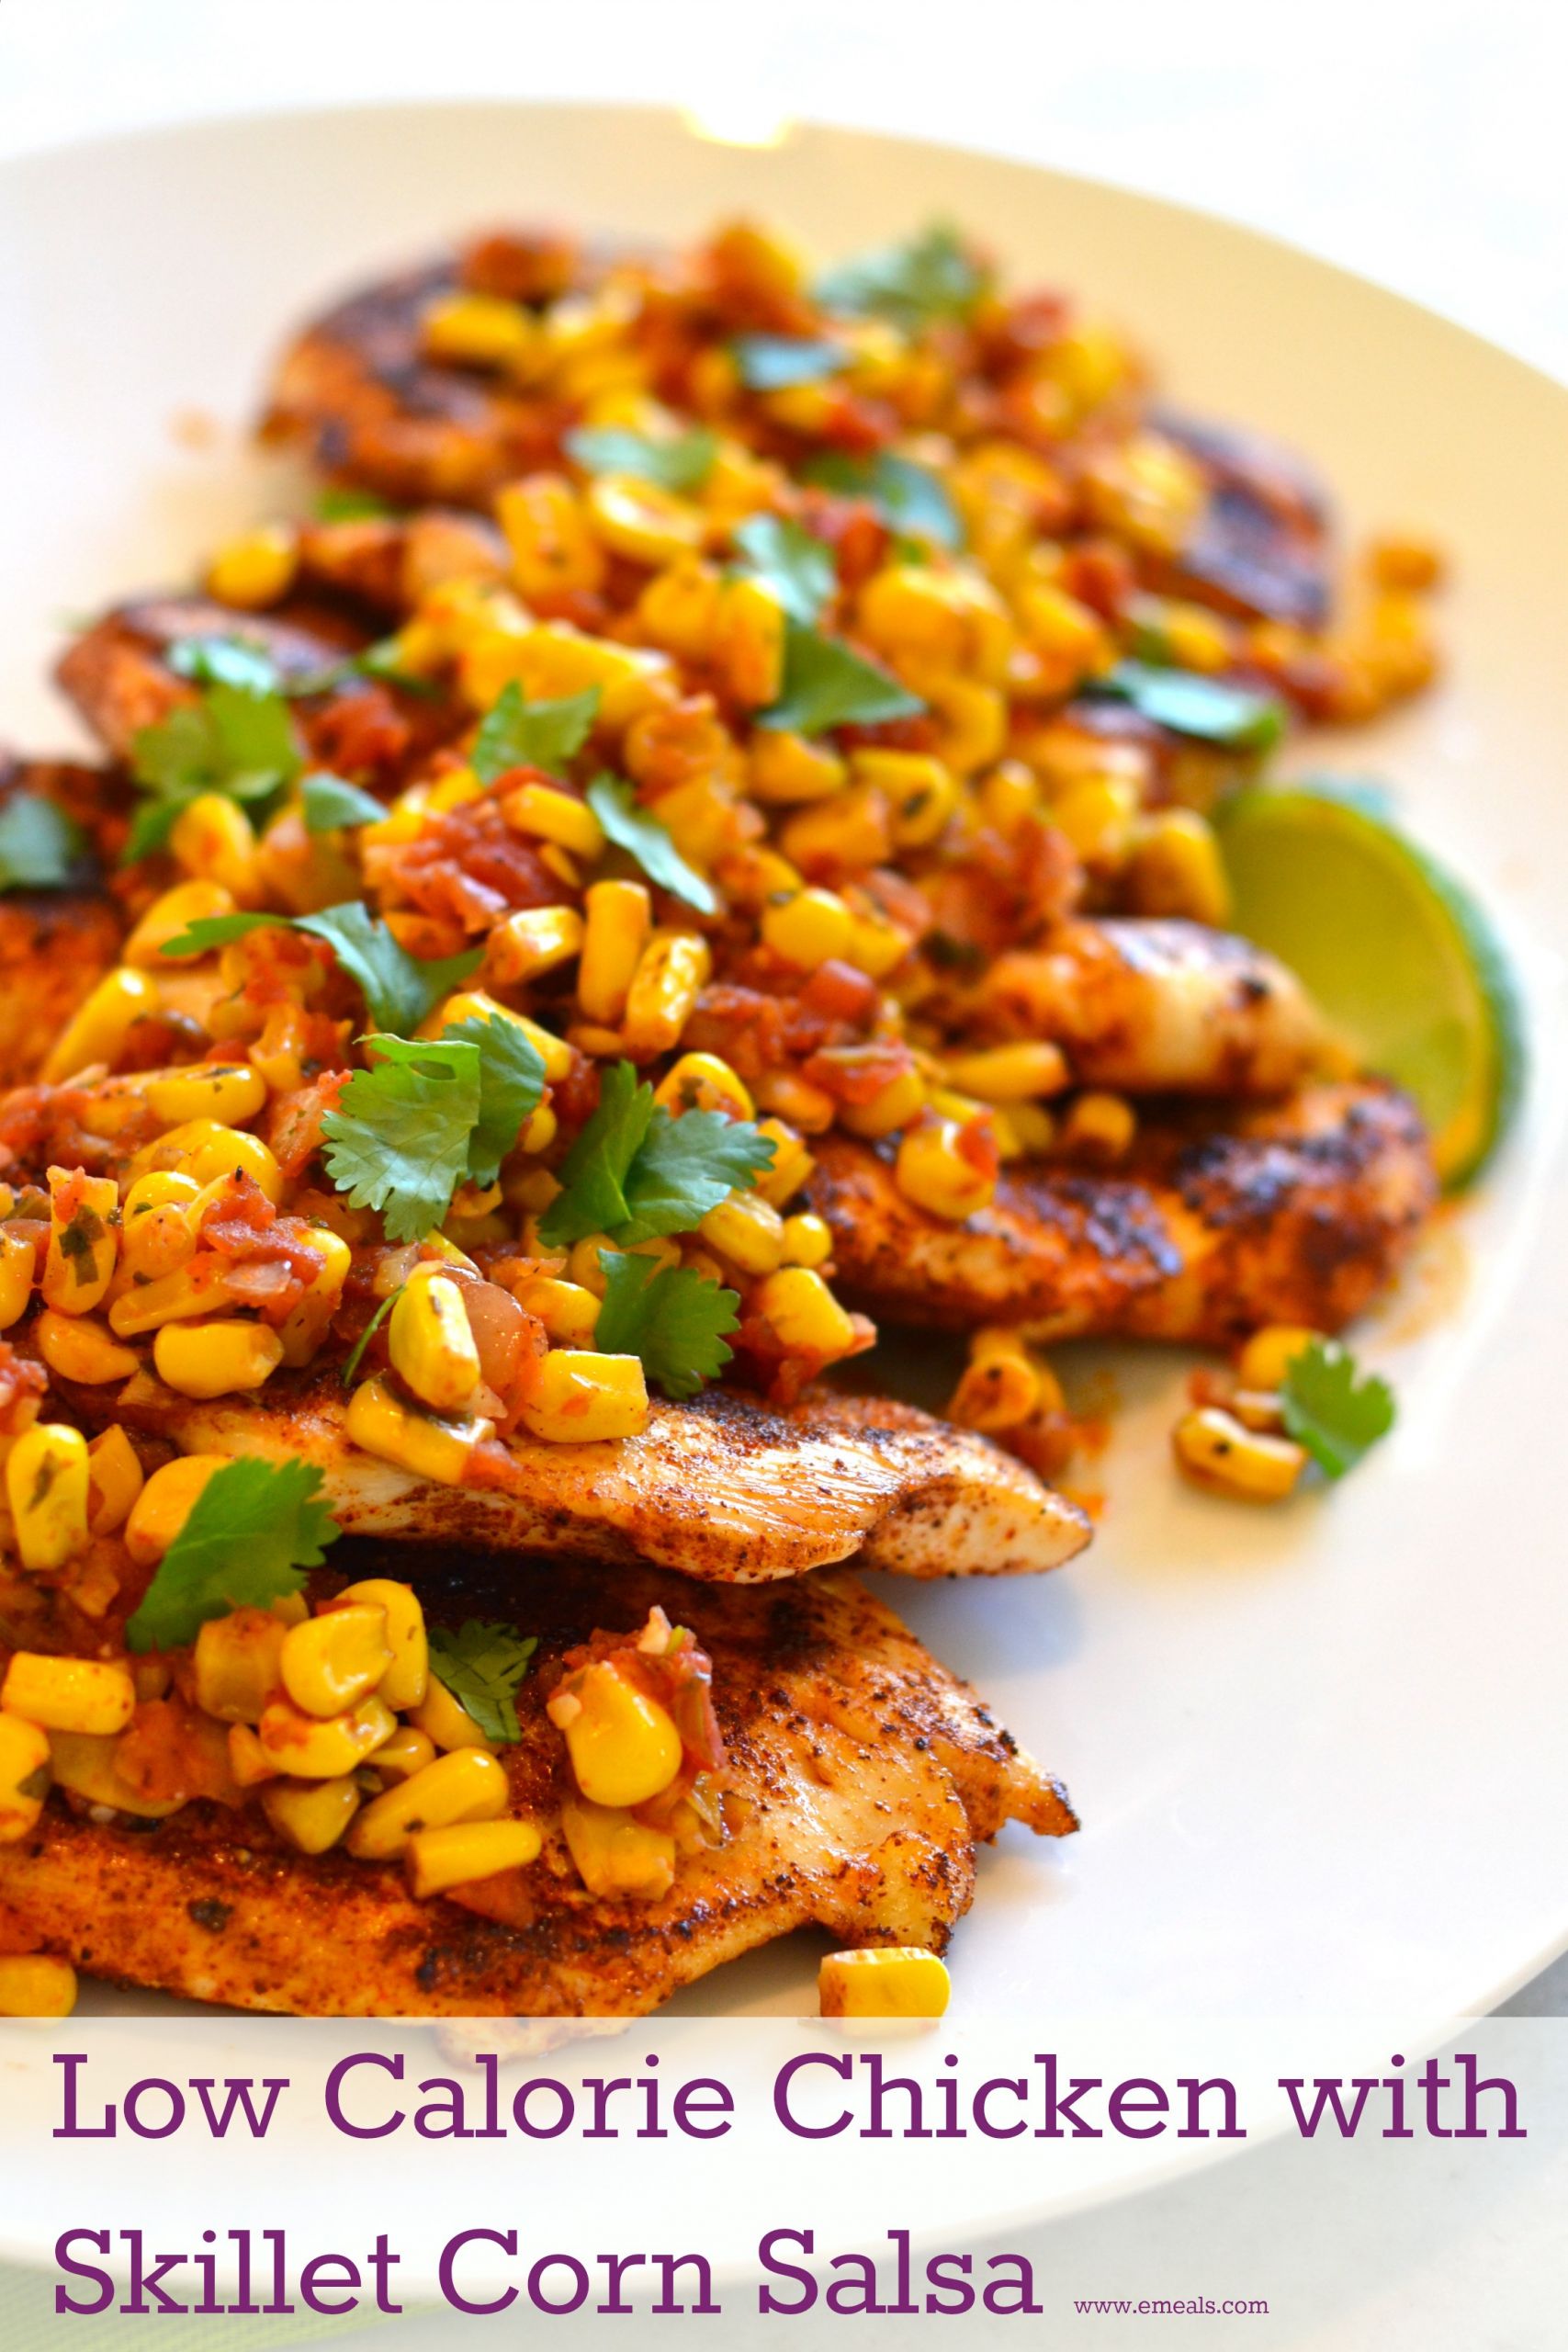 Low Calorie Chicken Dinners
 Low Calorie Dinner Recipe Spicy Chicken with Skillet Corn